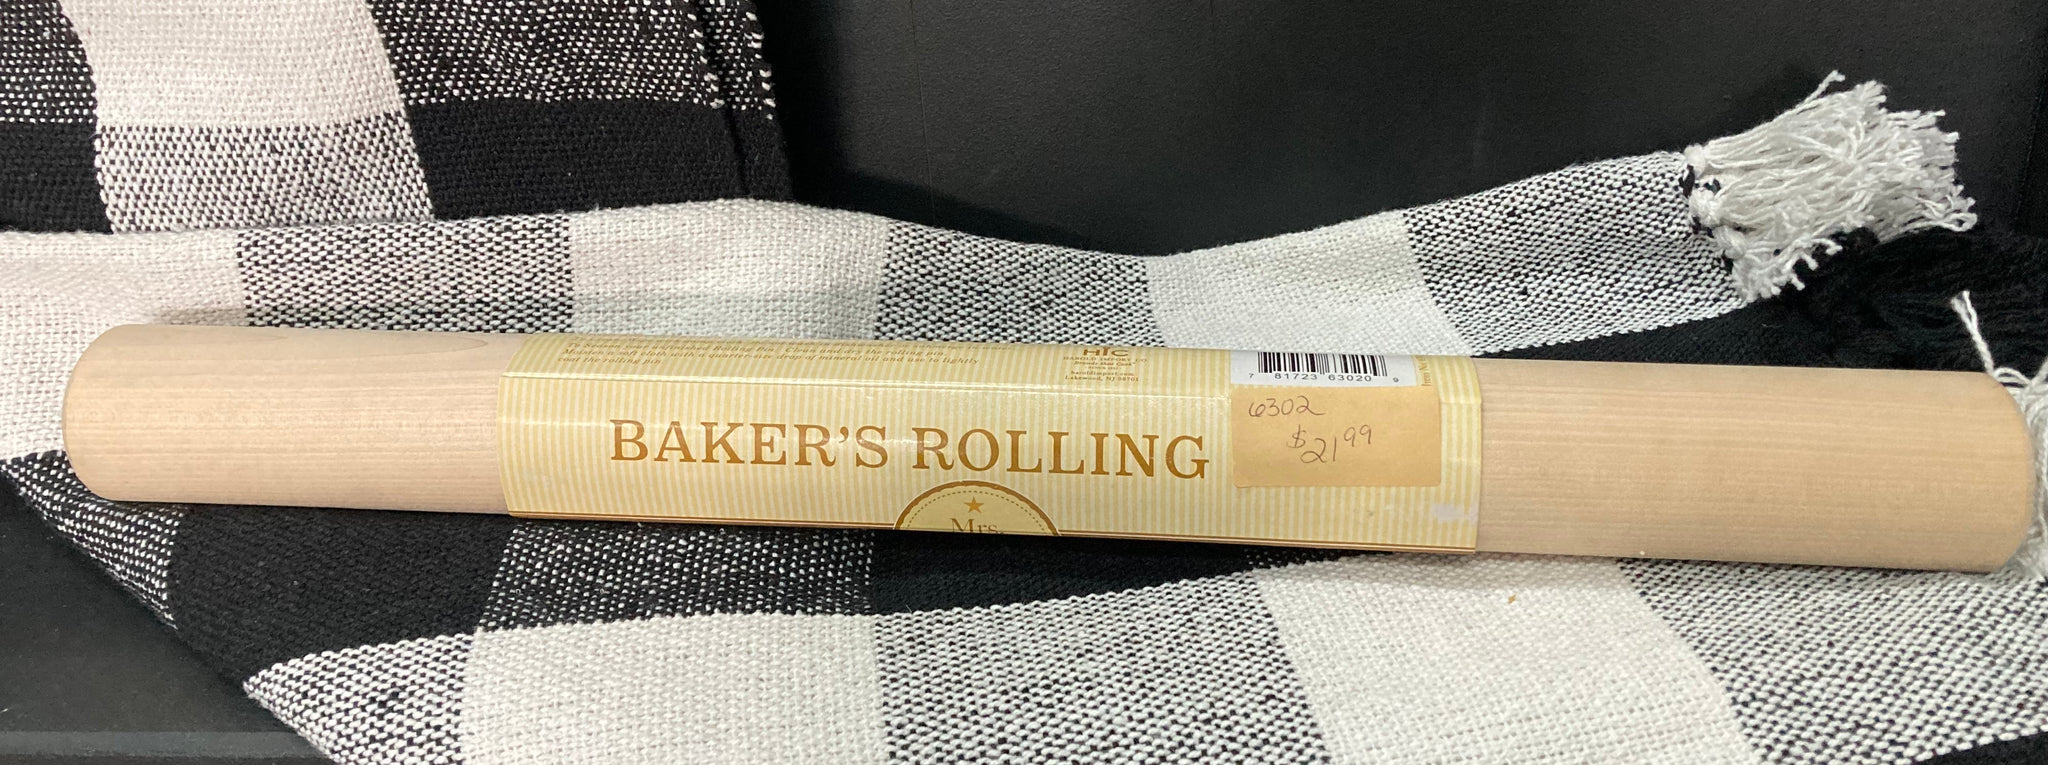 SALE!!!!  baker's rolling pin  SALE!!! MORE than 60% OFF!!